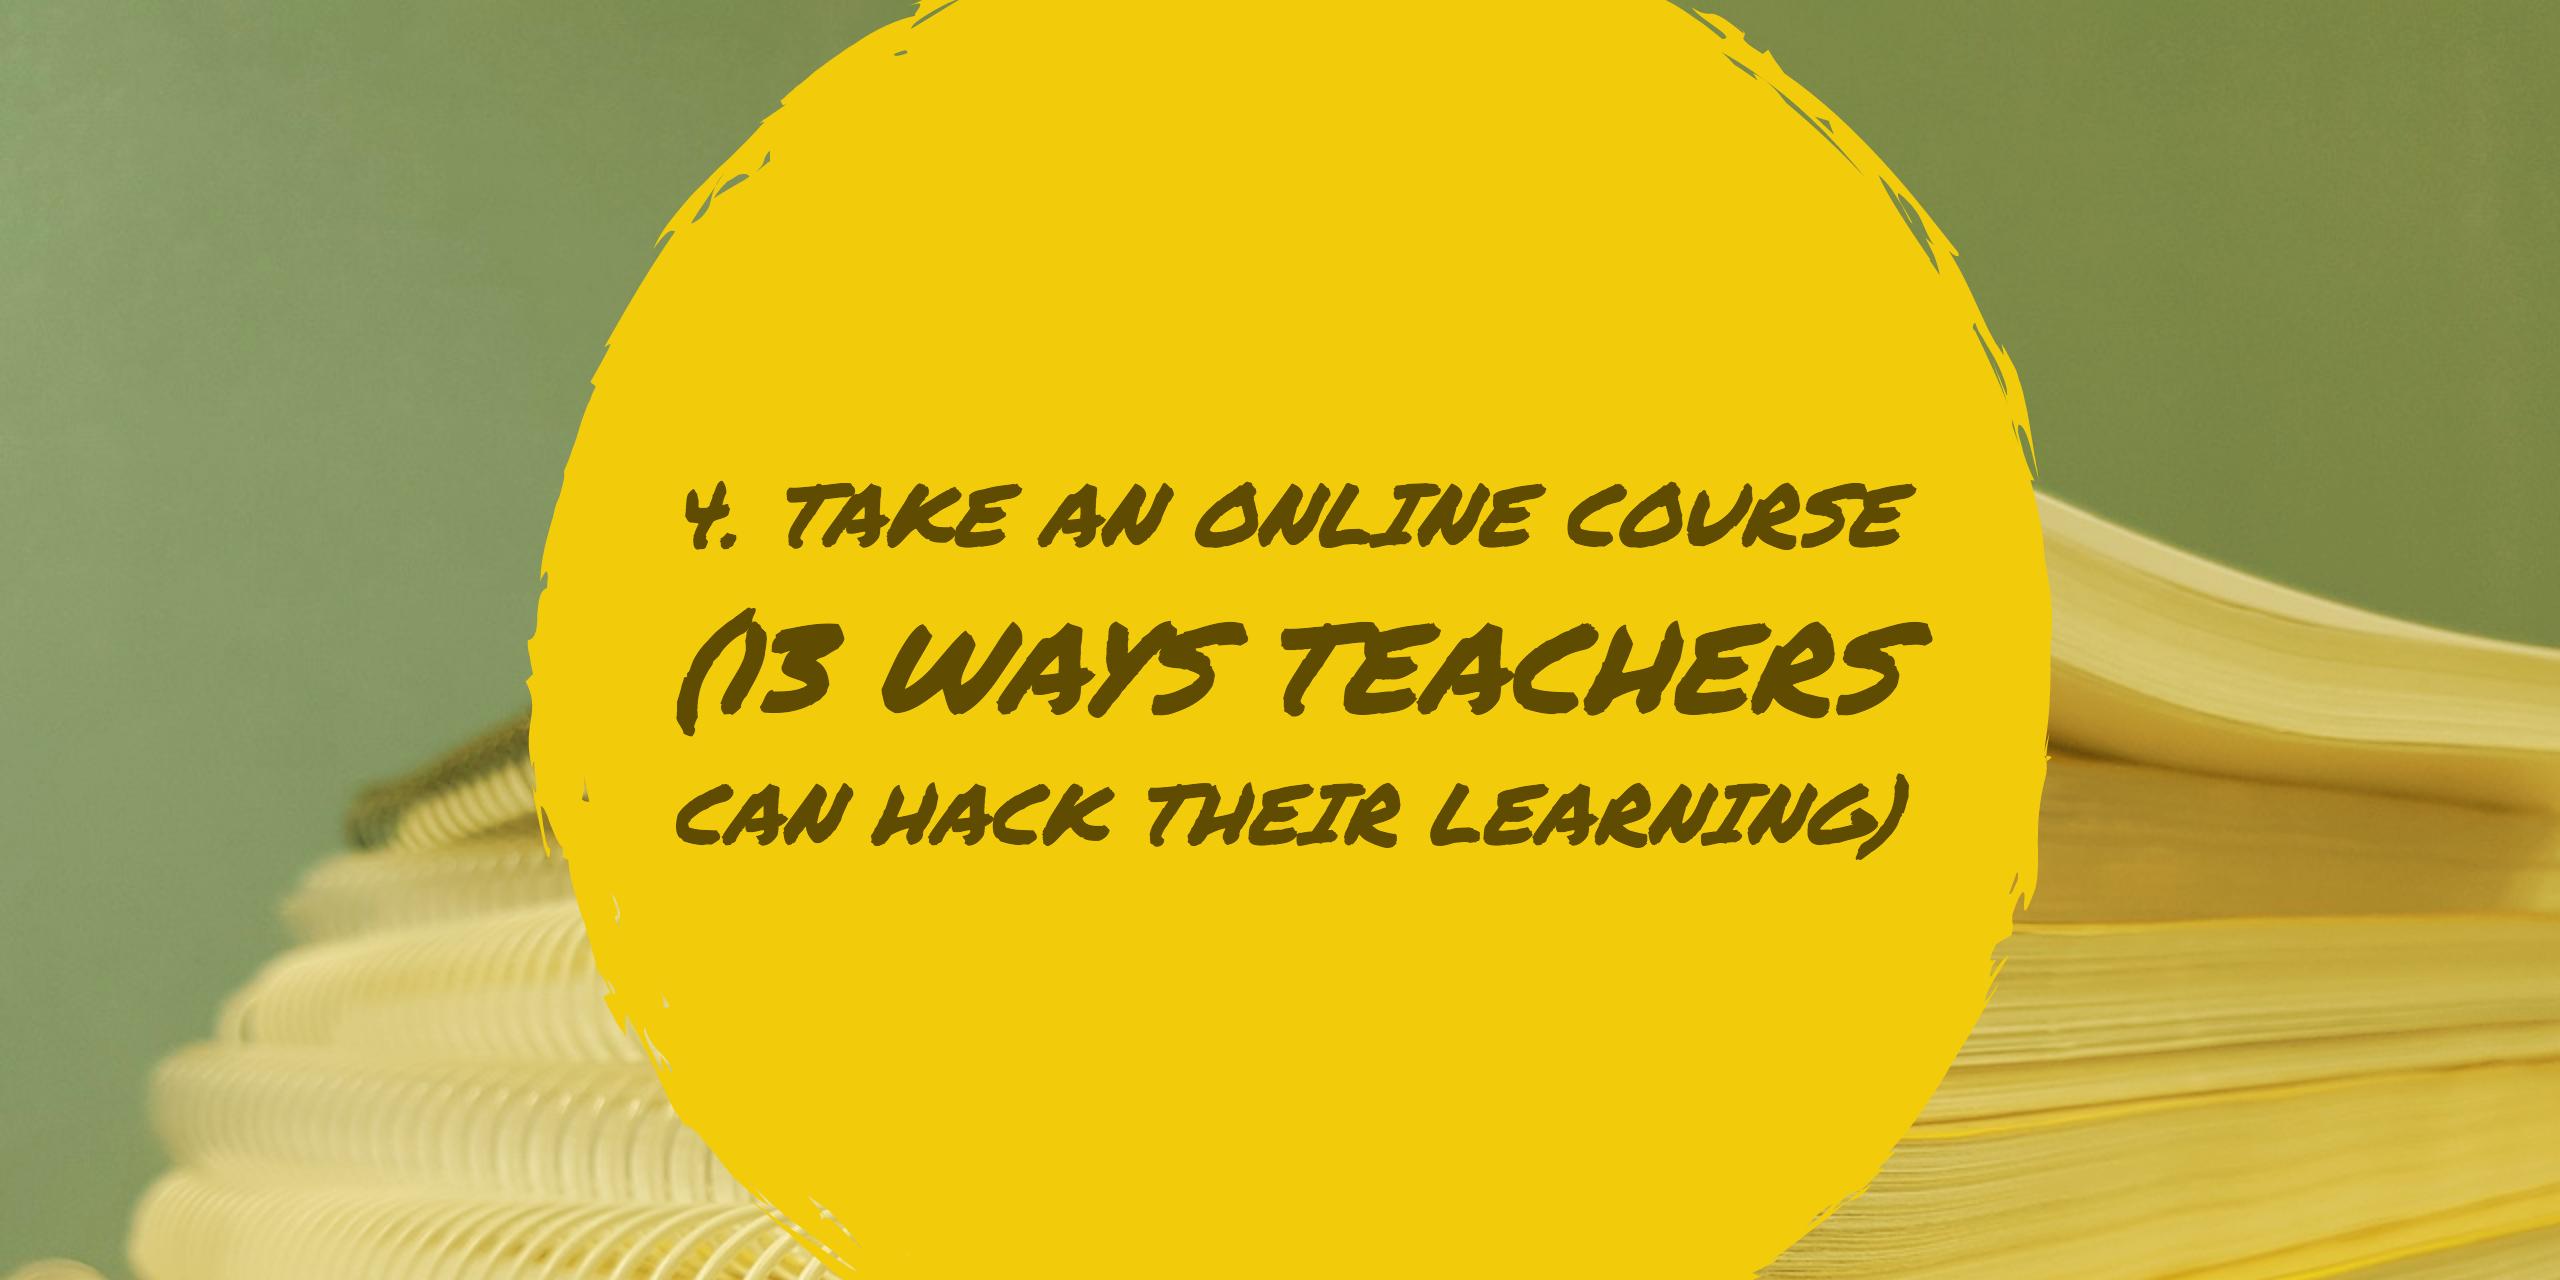 4. Take an online course (13 Ways Teachers Can Hack Their Learning)